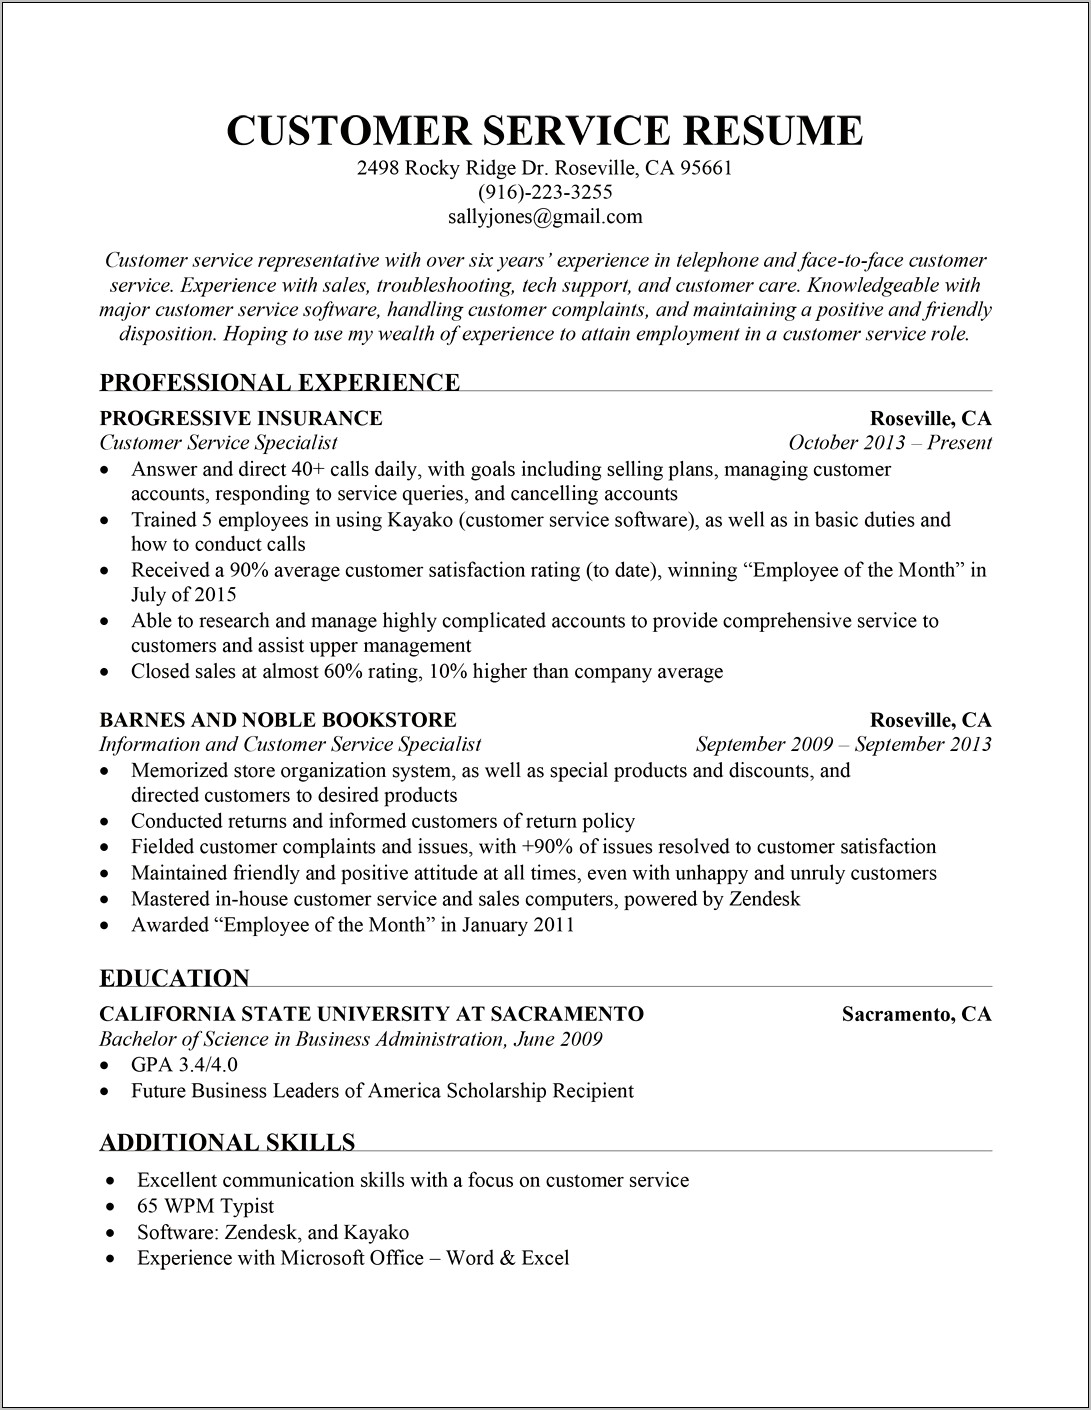 A Good Resume Example For Customer Service